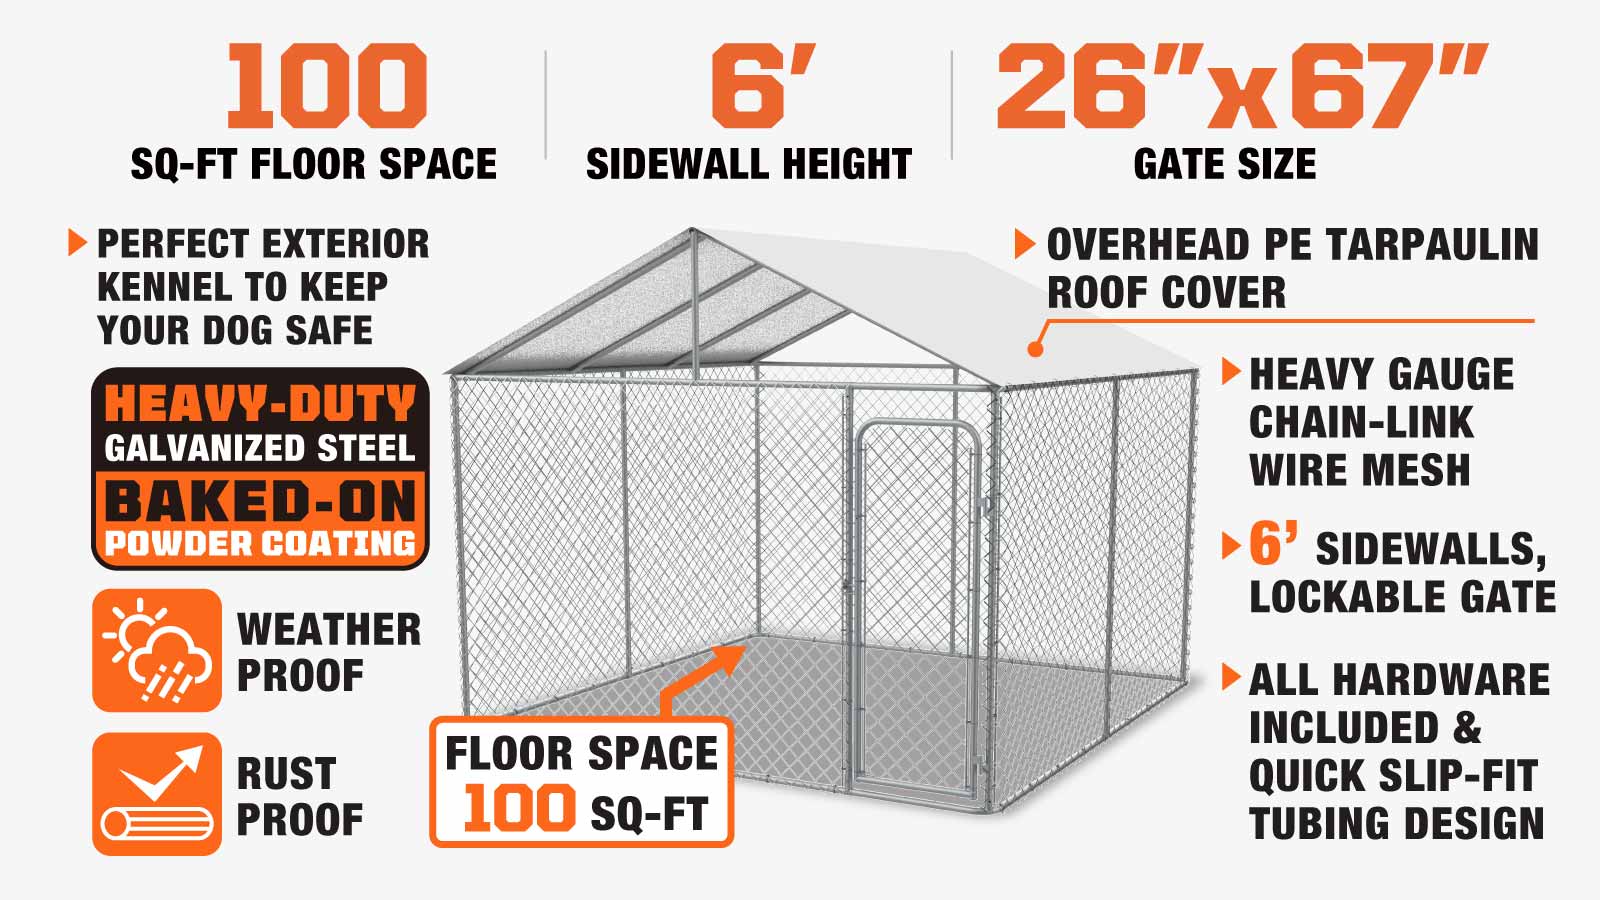 TMG Industrial 10’ x 10’ Outdoor Dog Kennel Playpen w/Cover, Outdoor Dog Runner, Pet Exercise House, Lockable Gate, 6’ Chain-Link Fence, TMG-DCP1010-description-image